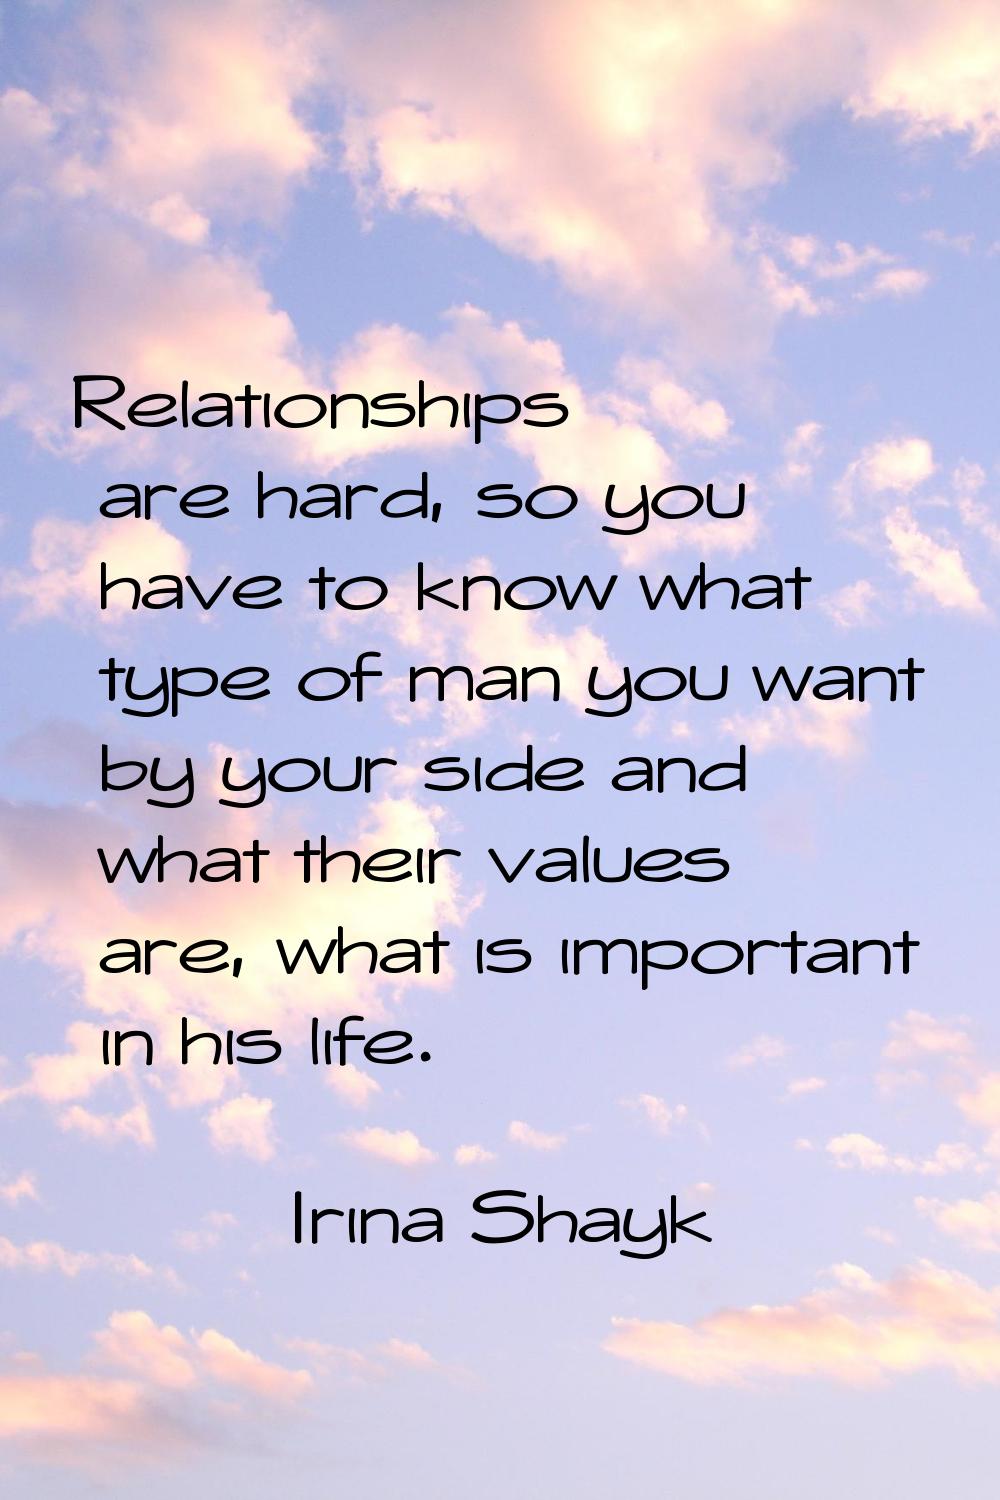 Relationships are hard, so you have to know what type of man you want by your side and what their v